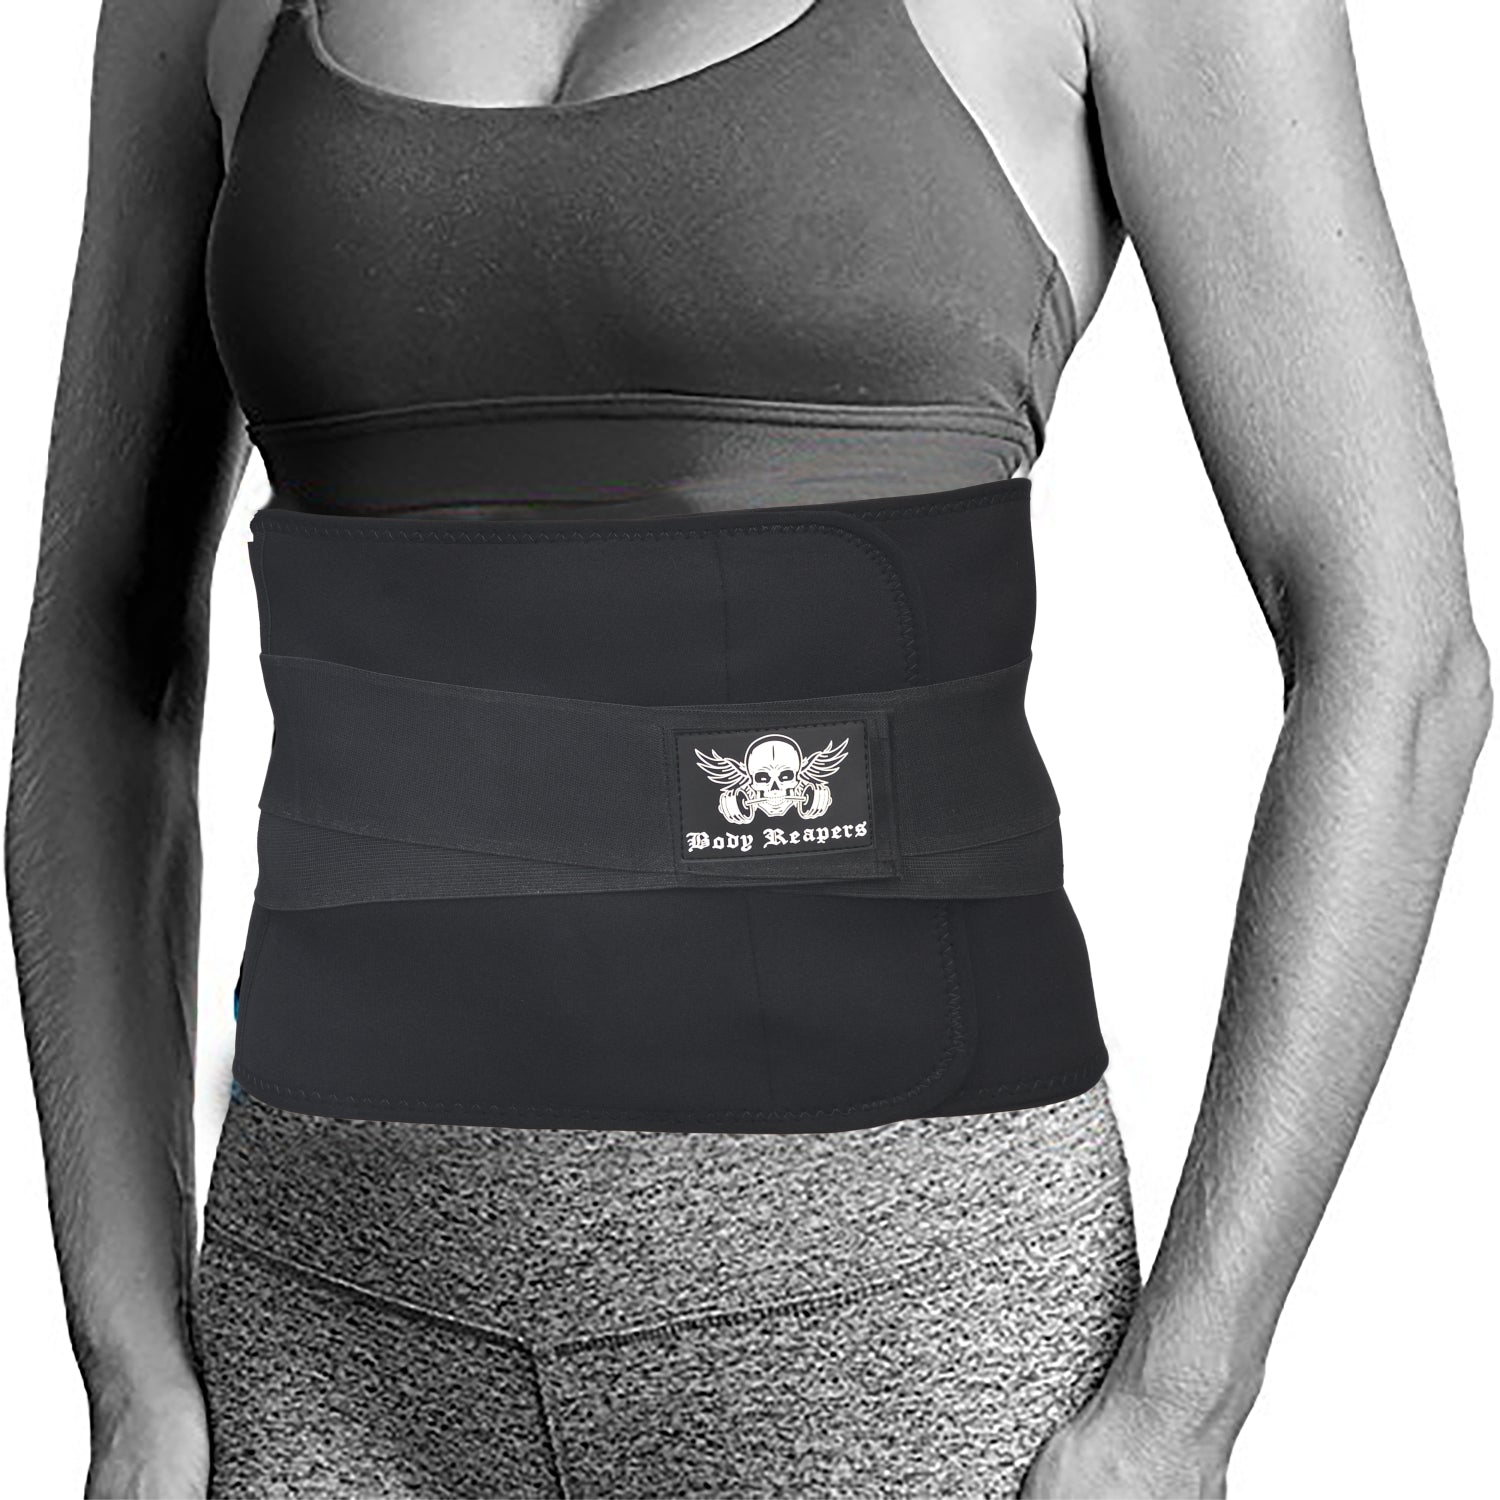 Sweat Belt For Weight Loss  Gym Accessory - Body Reapers